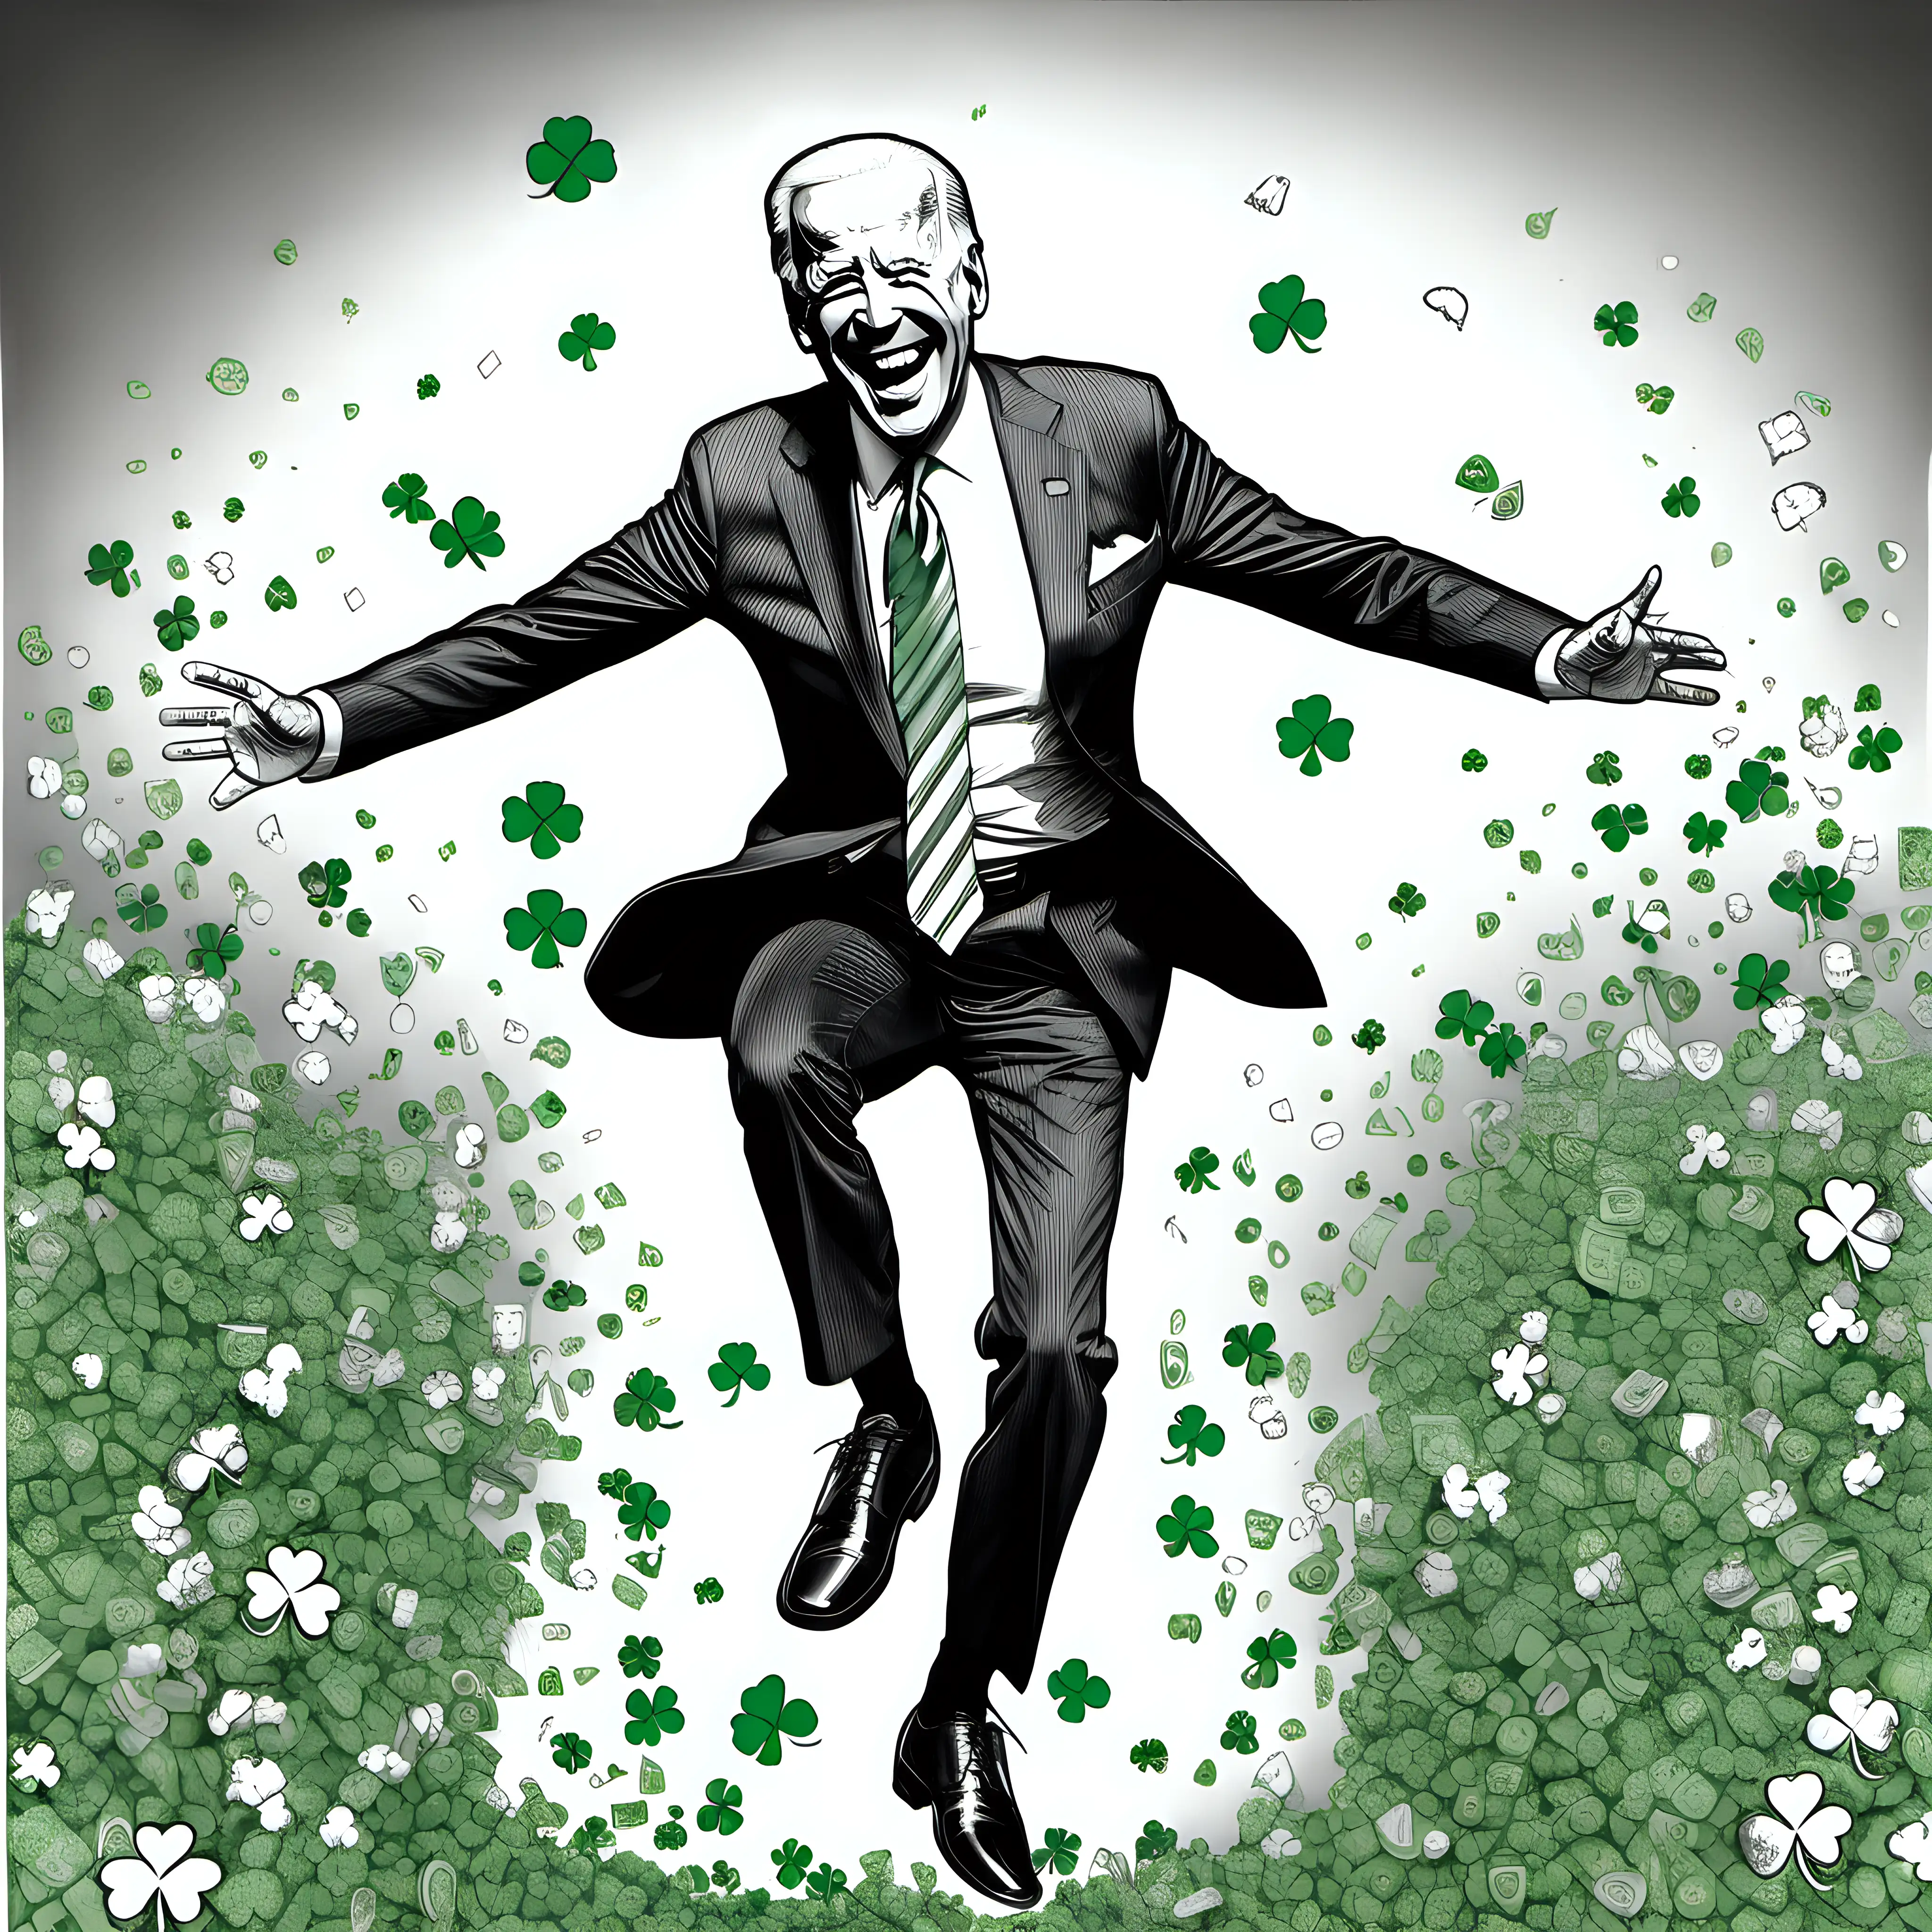 a B&W  drawing of president biden tripping and falling dressed to celebrate st patricks day with no background
